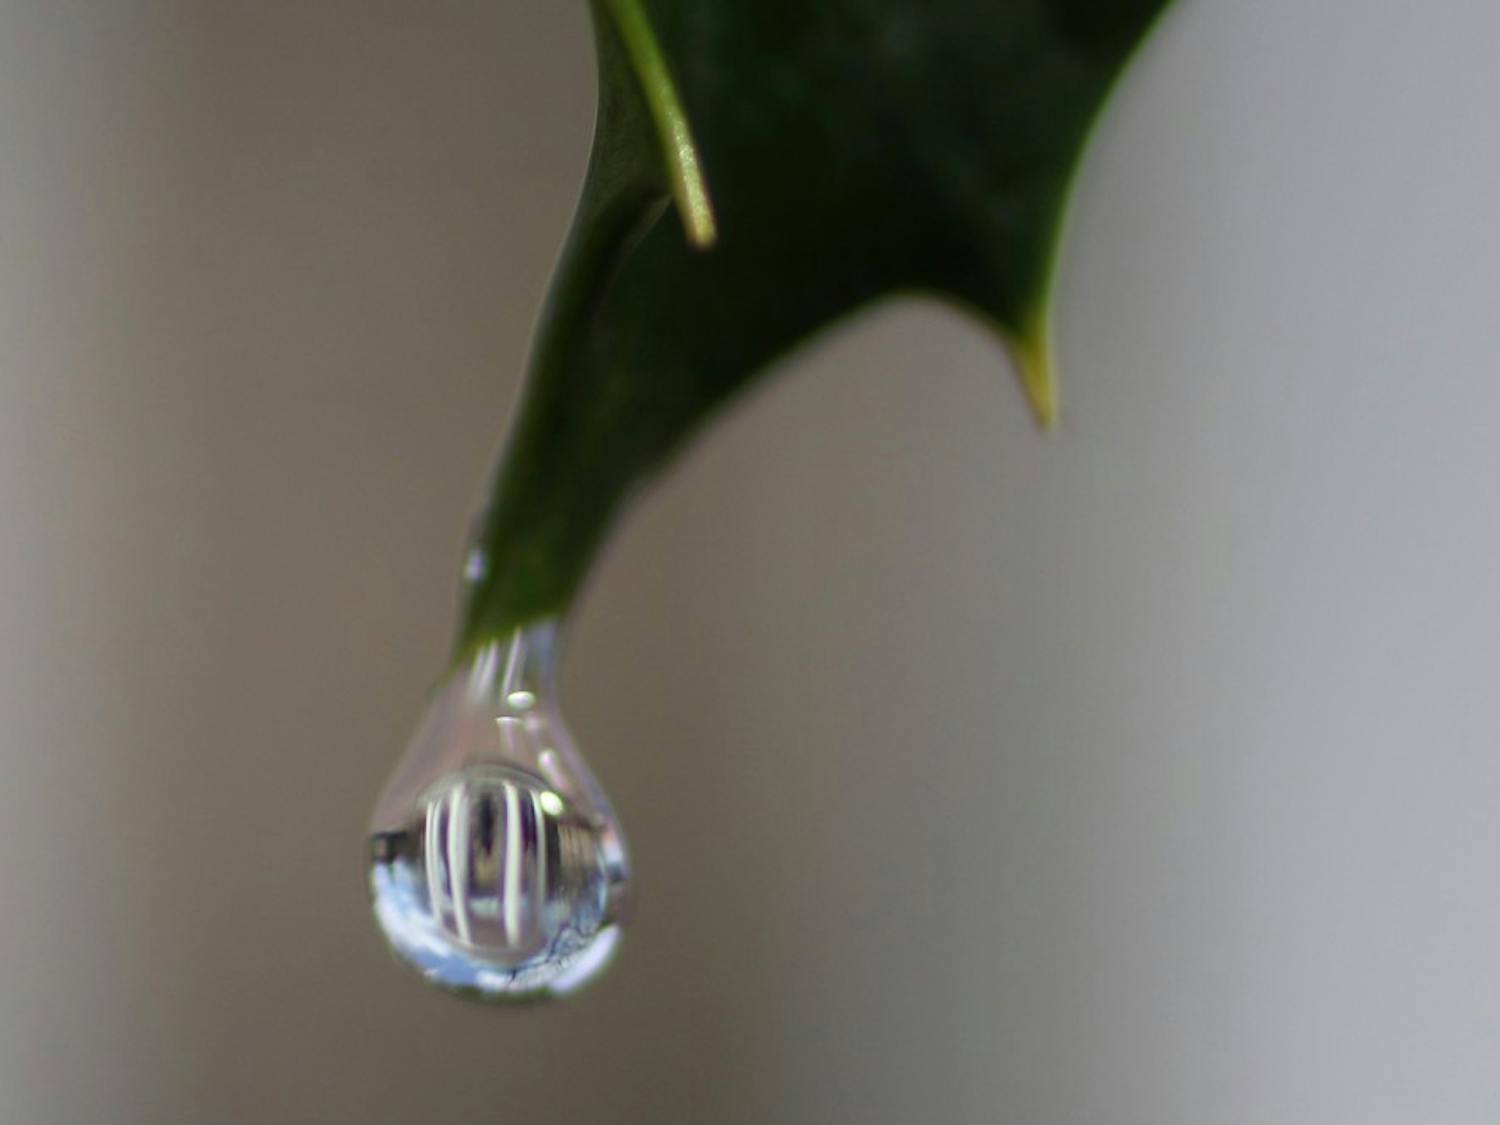 A water droplet reflects the Old Well. UNC has a new&nbsp;goal to bring net water usage down to zero.